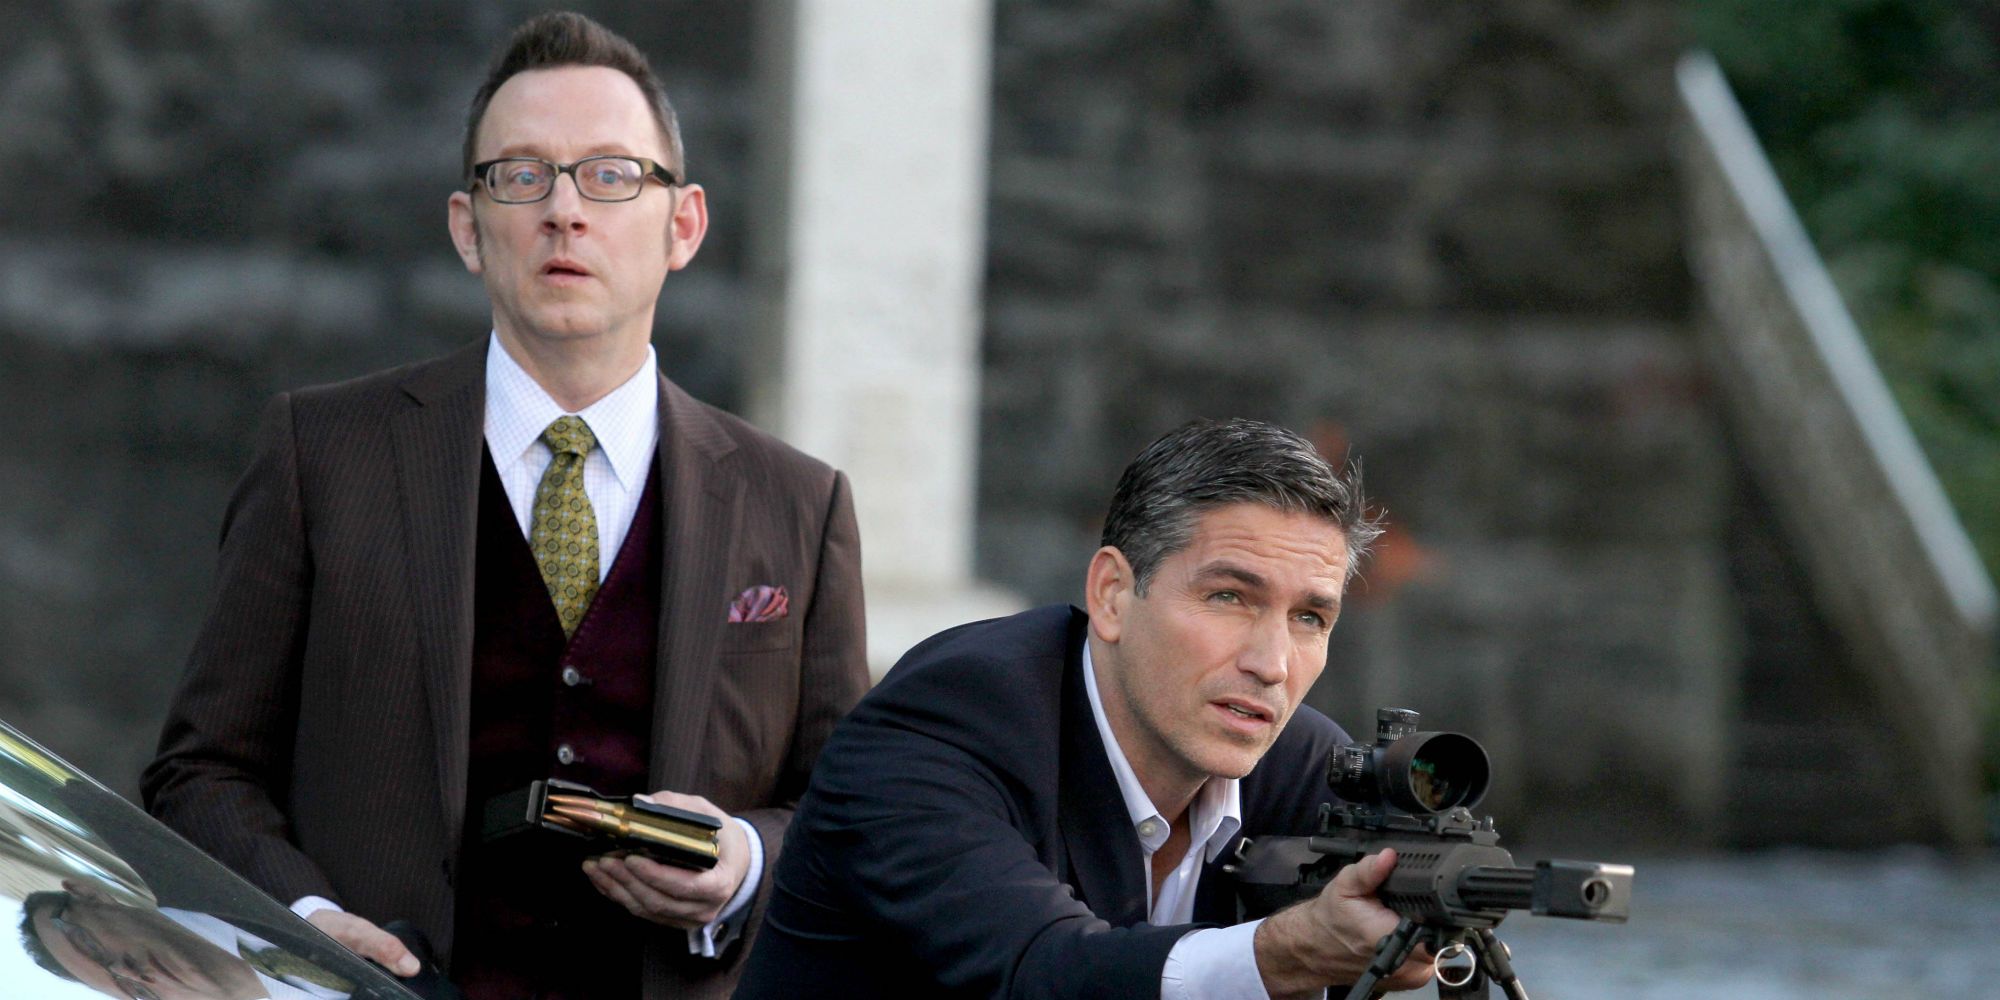 Finch stands behind Reese in Person of Interest